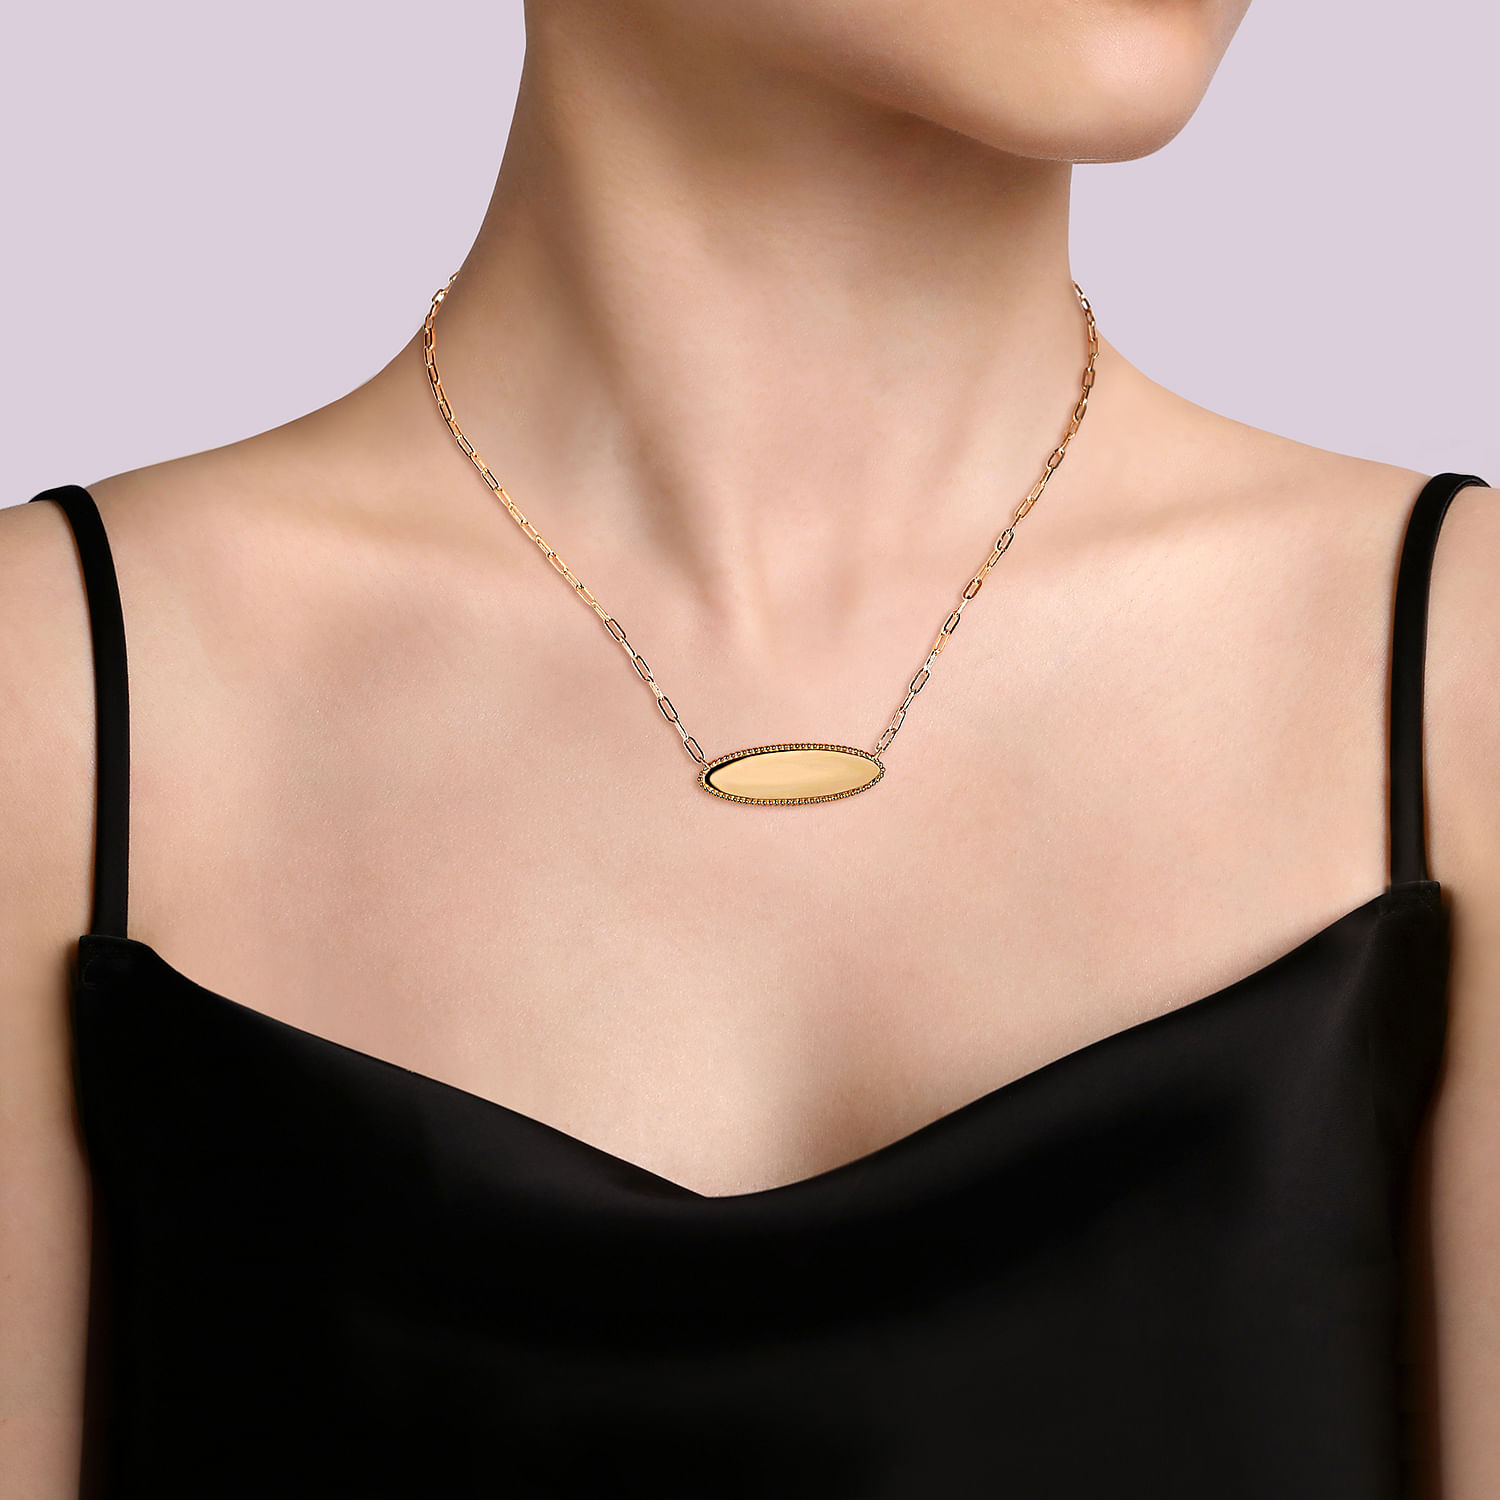 14K Yellow Gold Bujukan Personalize Elongated Oval Pendant Necklace with Hollow Paperclip Chain